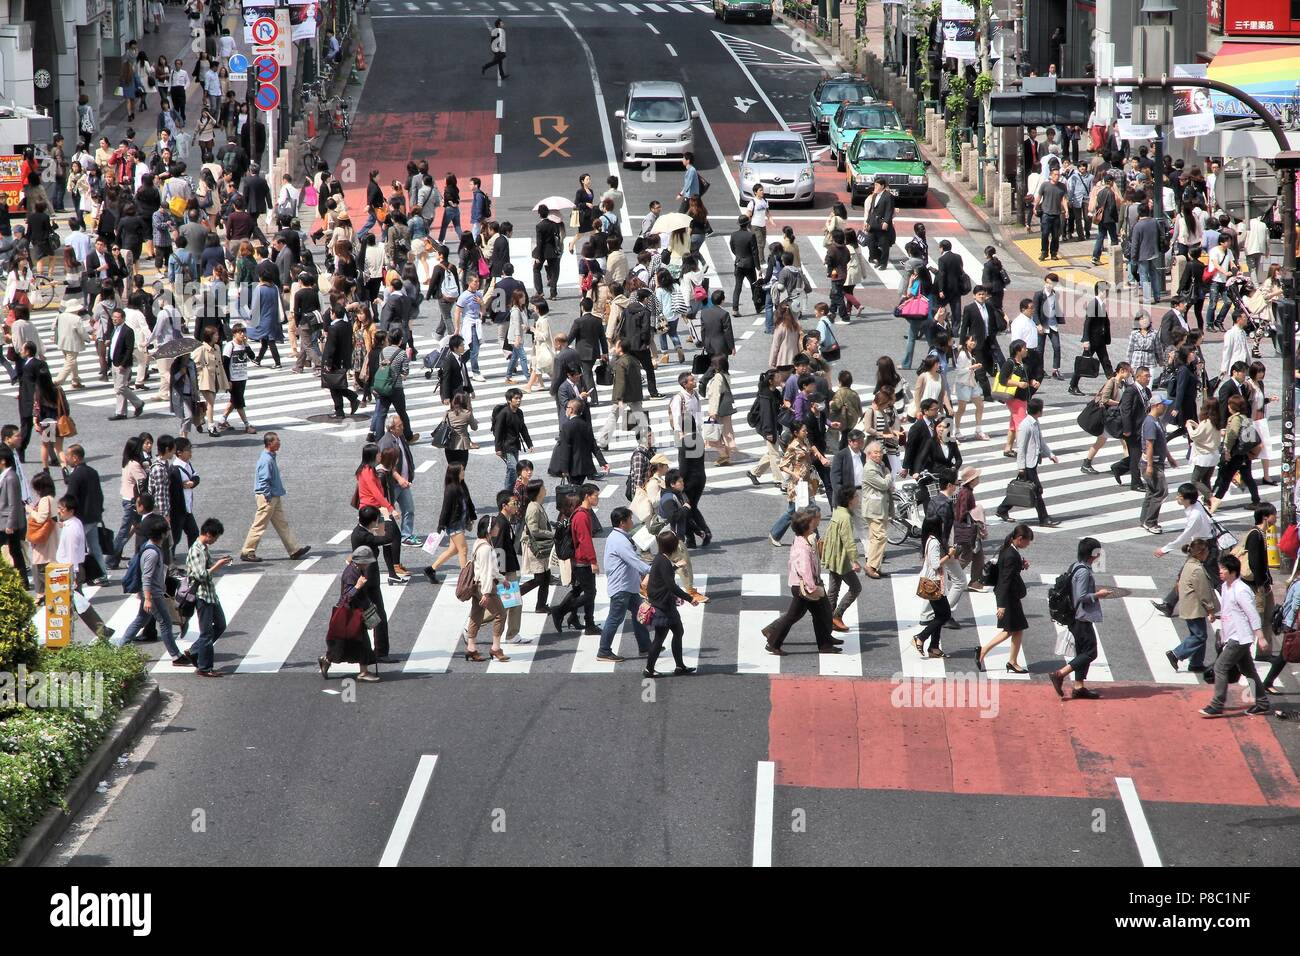 TOKYO, JAPAN - MAY 11, 2012: People walk the Hachiko crossing in Shibuya, Tokyo. Shibuya crossing is one of busiest places in Tokyo and is recognized  Stock Photo